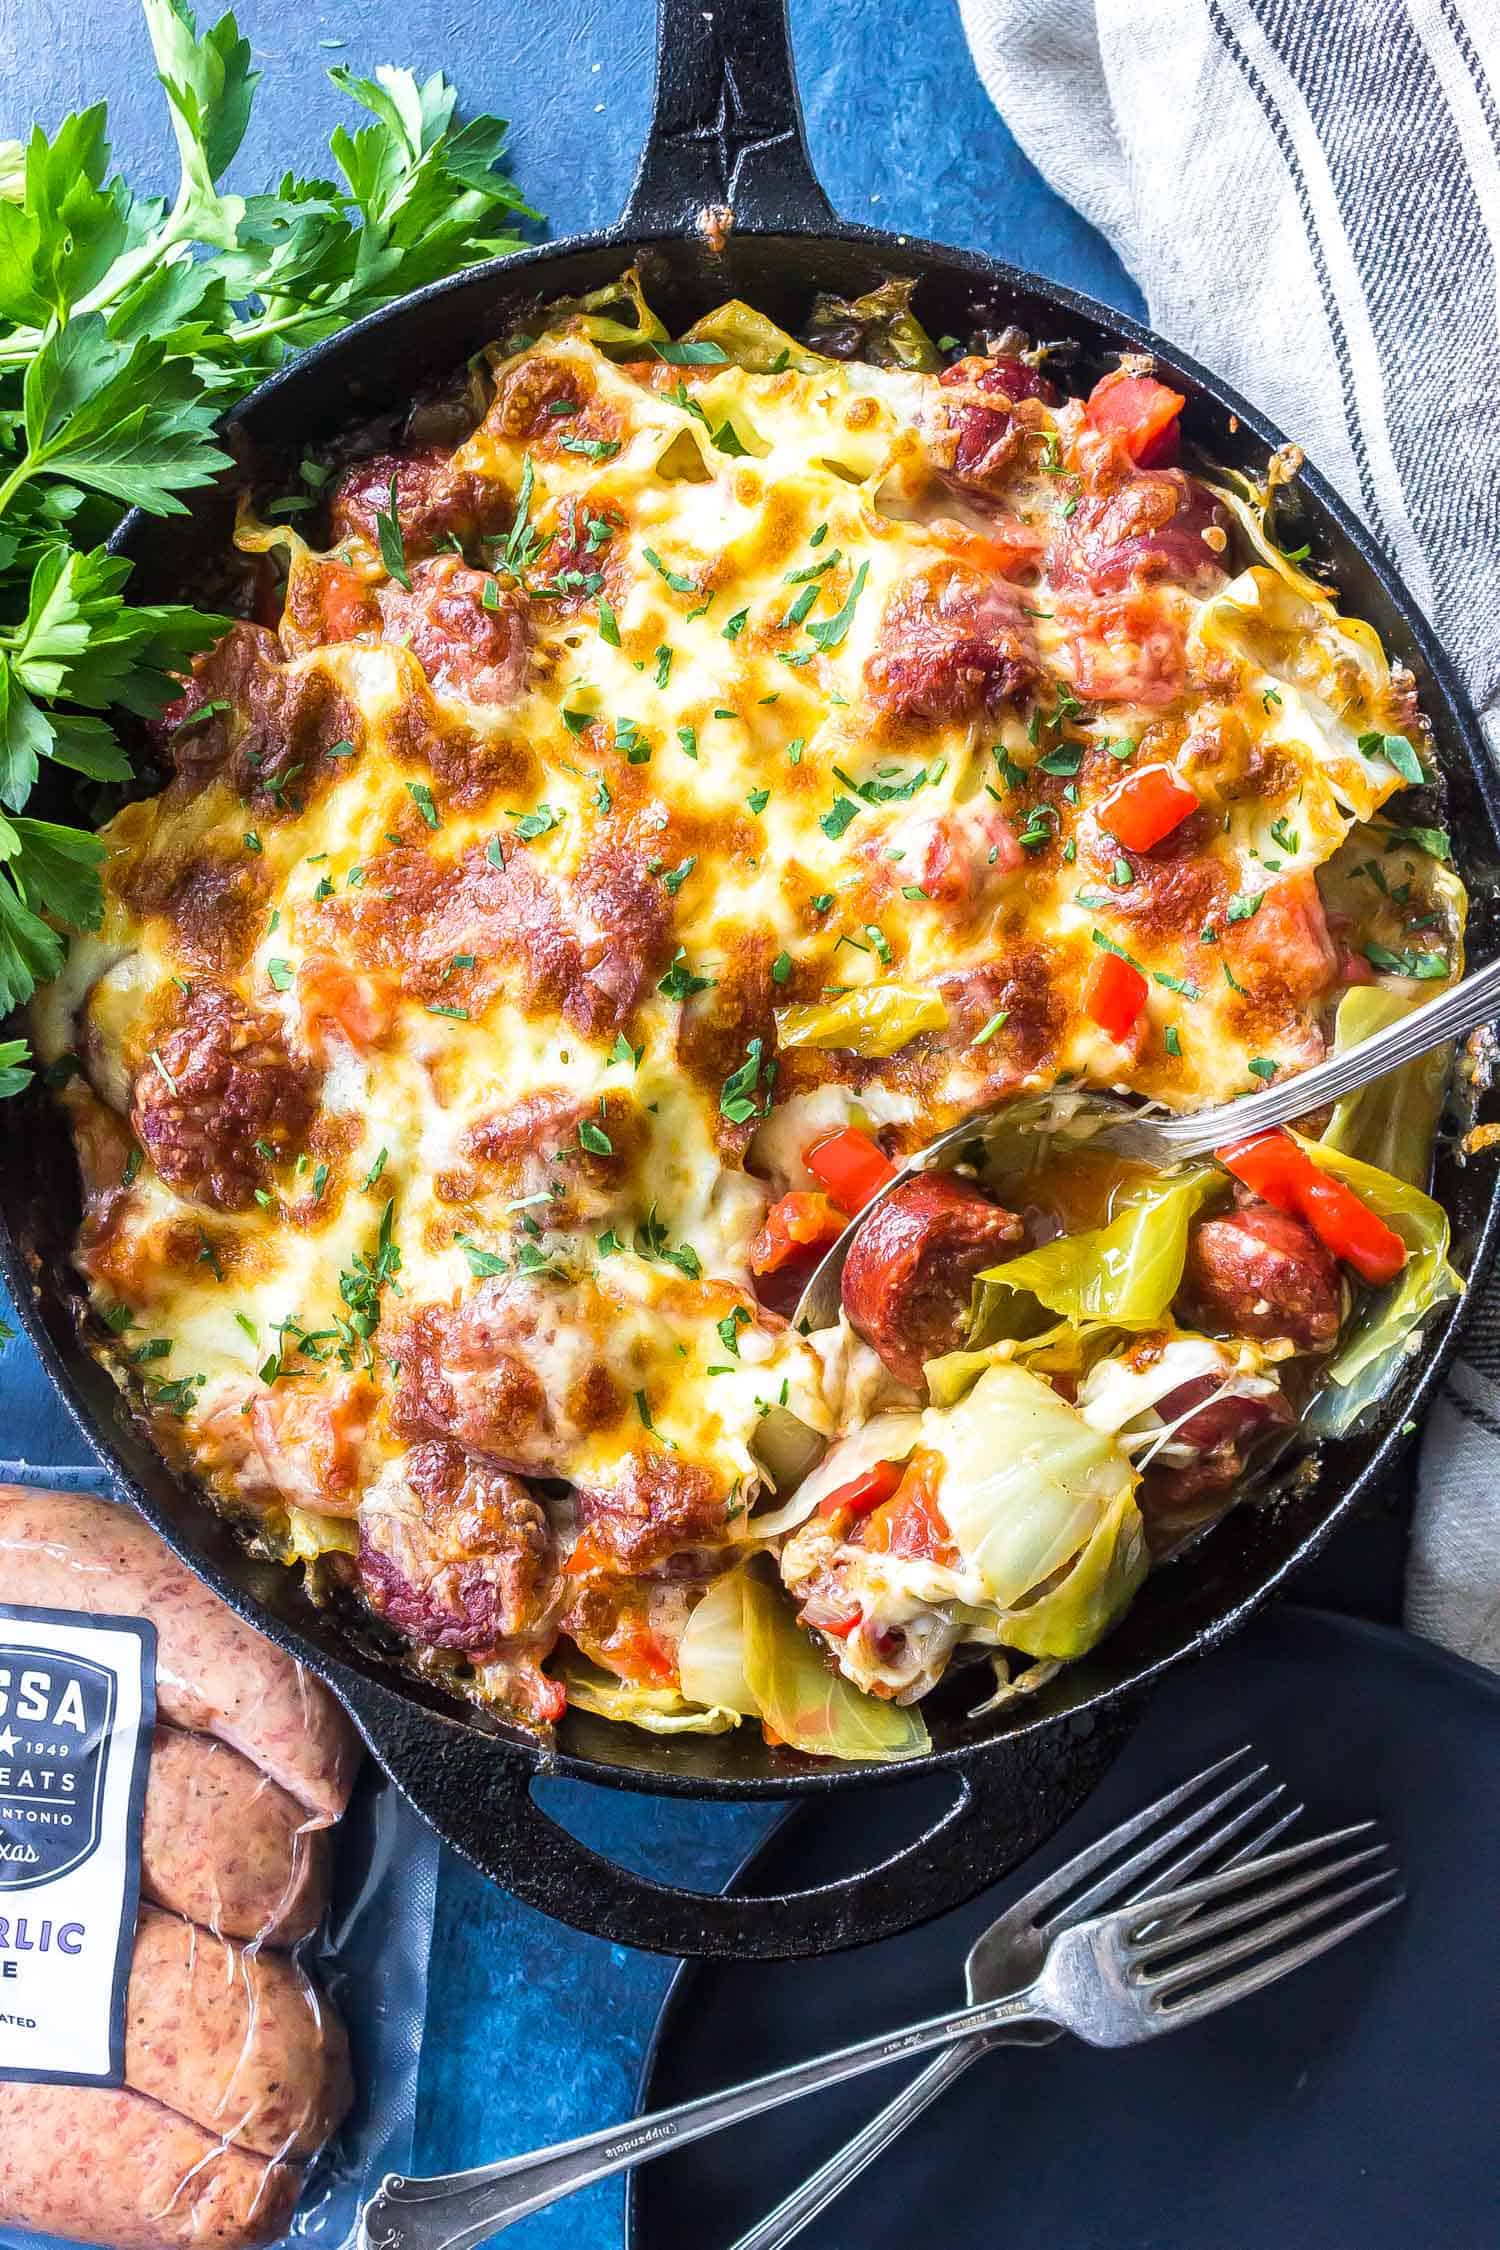 Keto Cheesy Cabbage Sausage Skillet Cast Iron Keto,Weevil Bugs